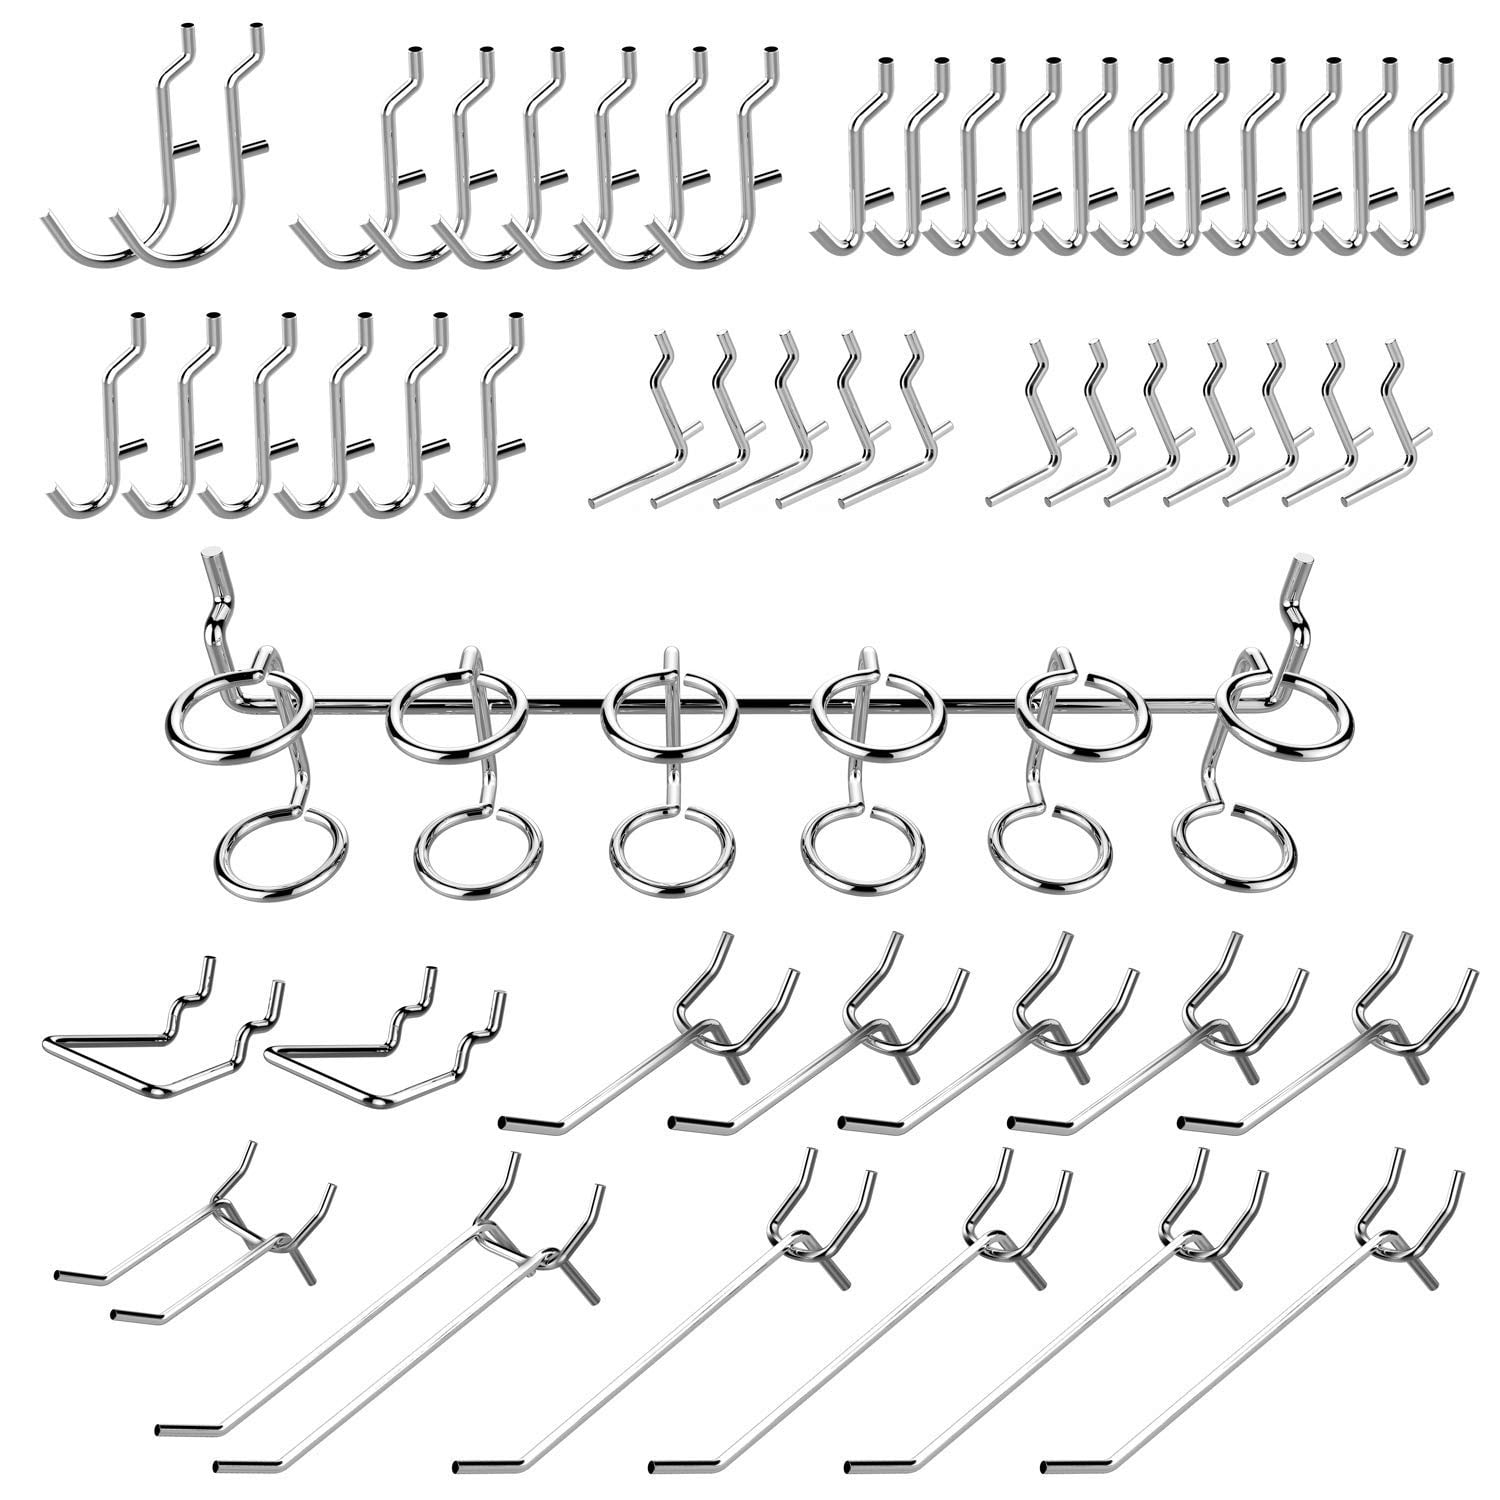 Peg Hooks fits in 1//4 or 1//8 Holes 8 inch Chrome Pegboard Hooks 20 Pack